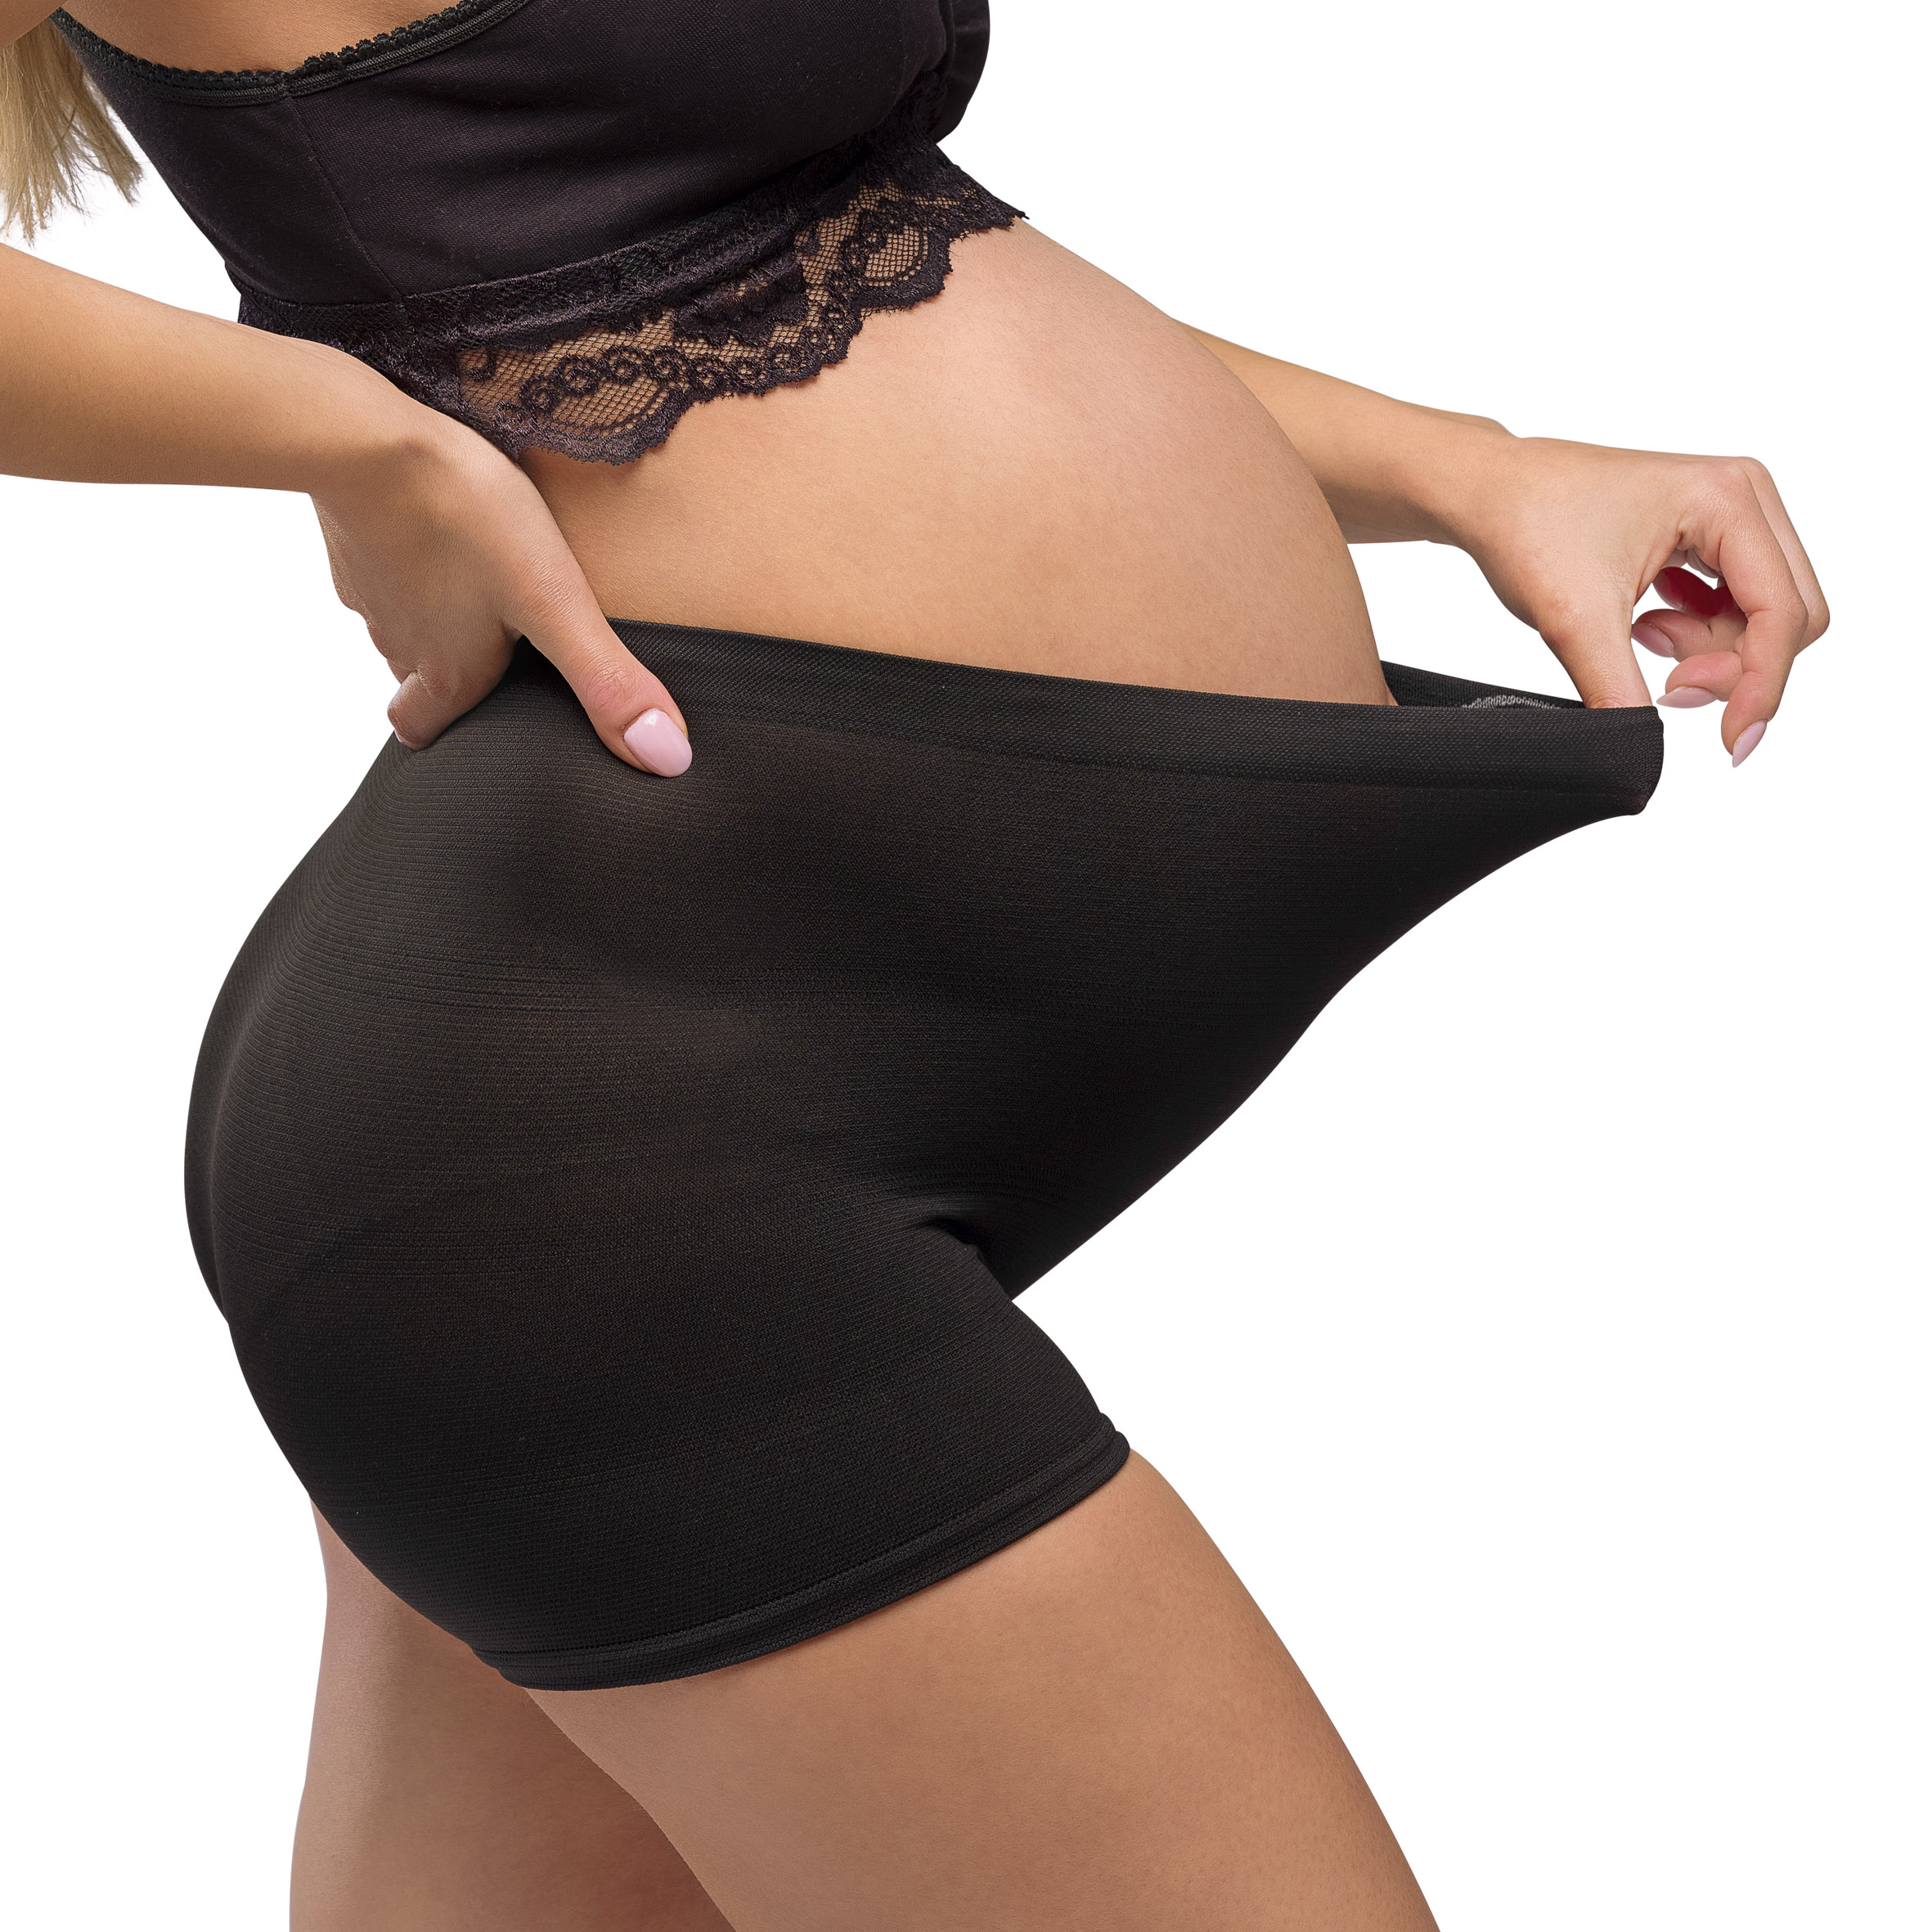 Carriwell Maternity Support Panty S-XL Black - RoboKidShop